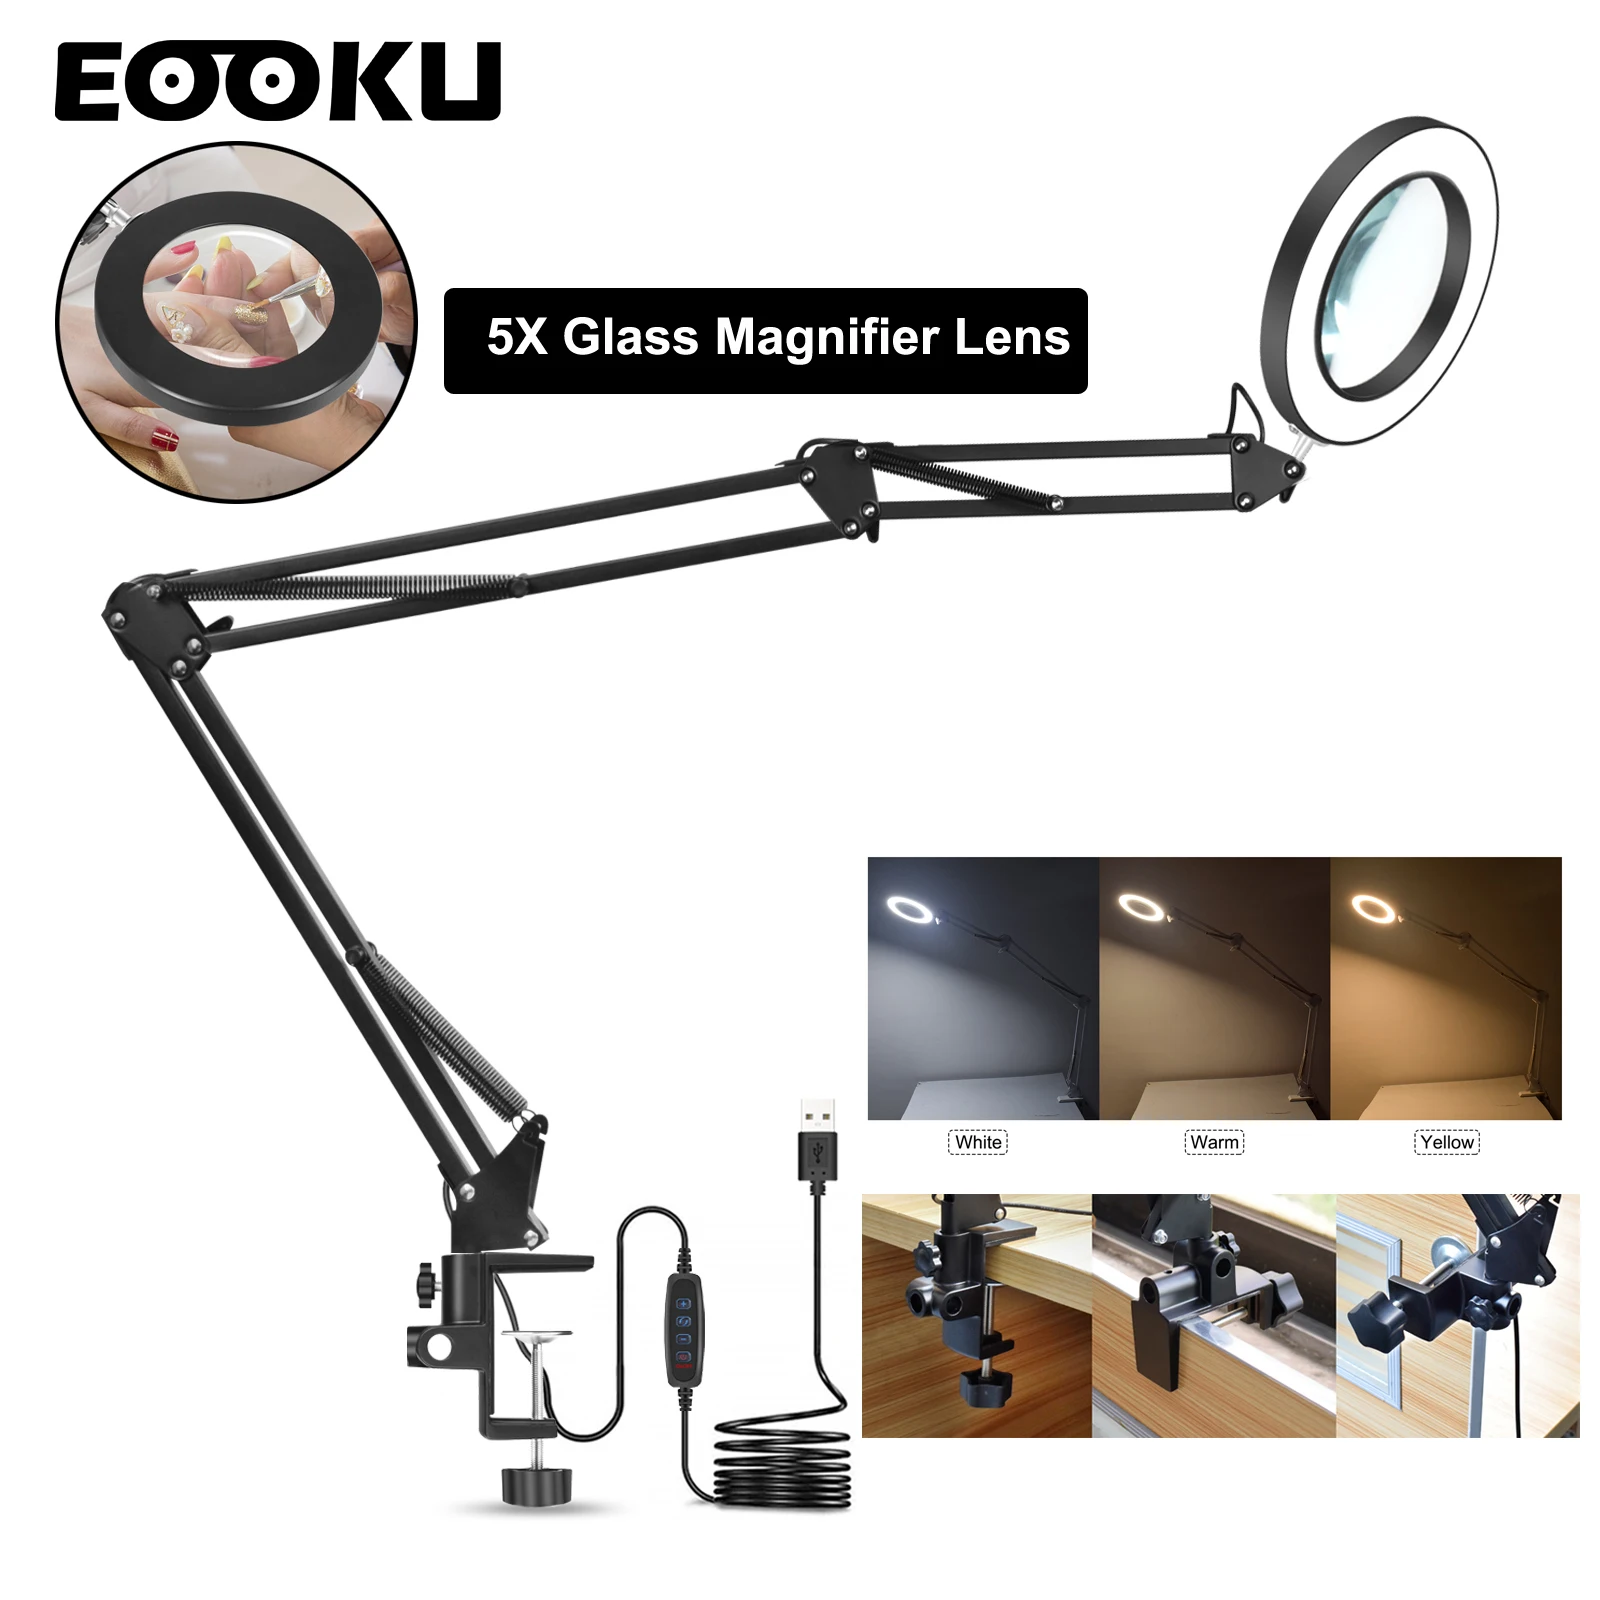 

EOOKU 10W Desk Lamp 5X Illuminated Magnifying Glass with 72Pcs LED Lights for Reading/Nail Art/Beauty/Close Working Tools